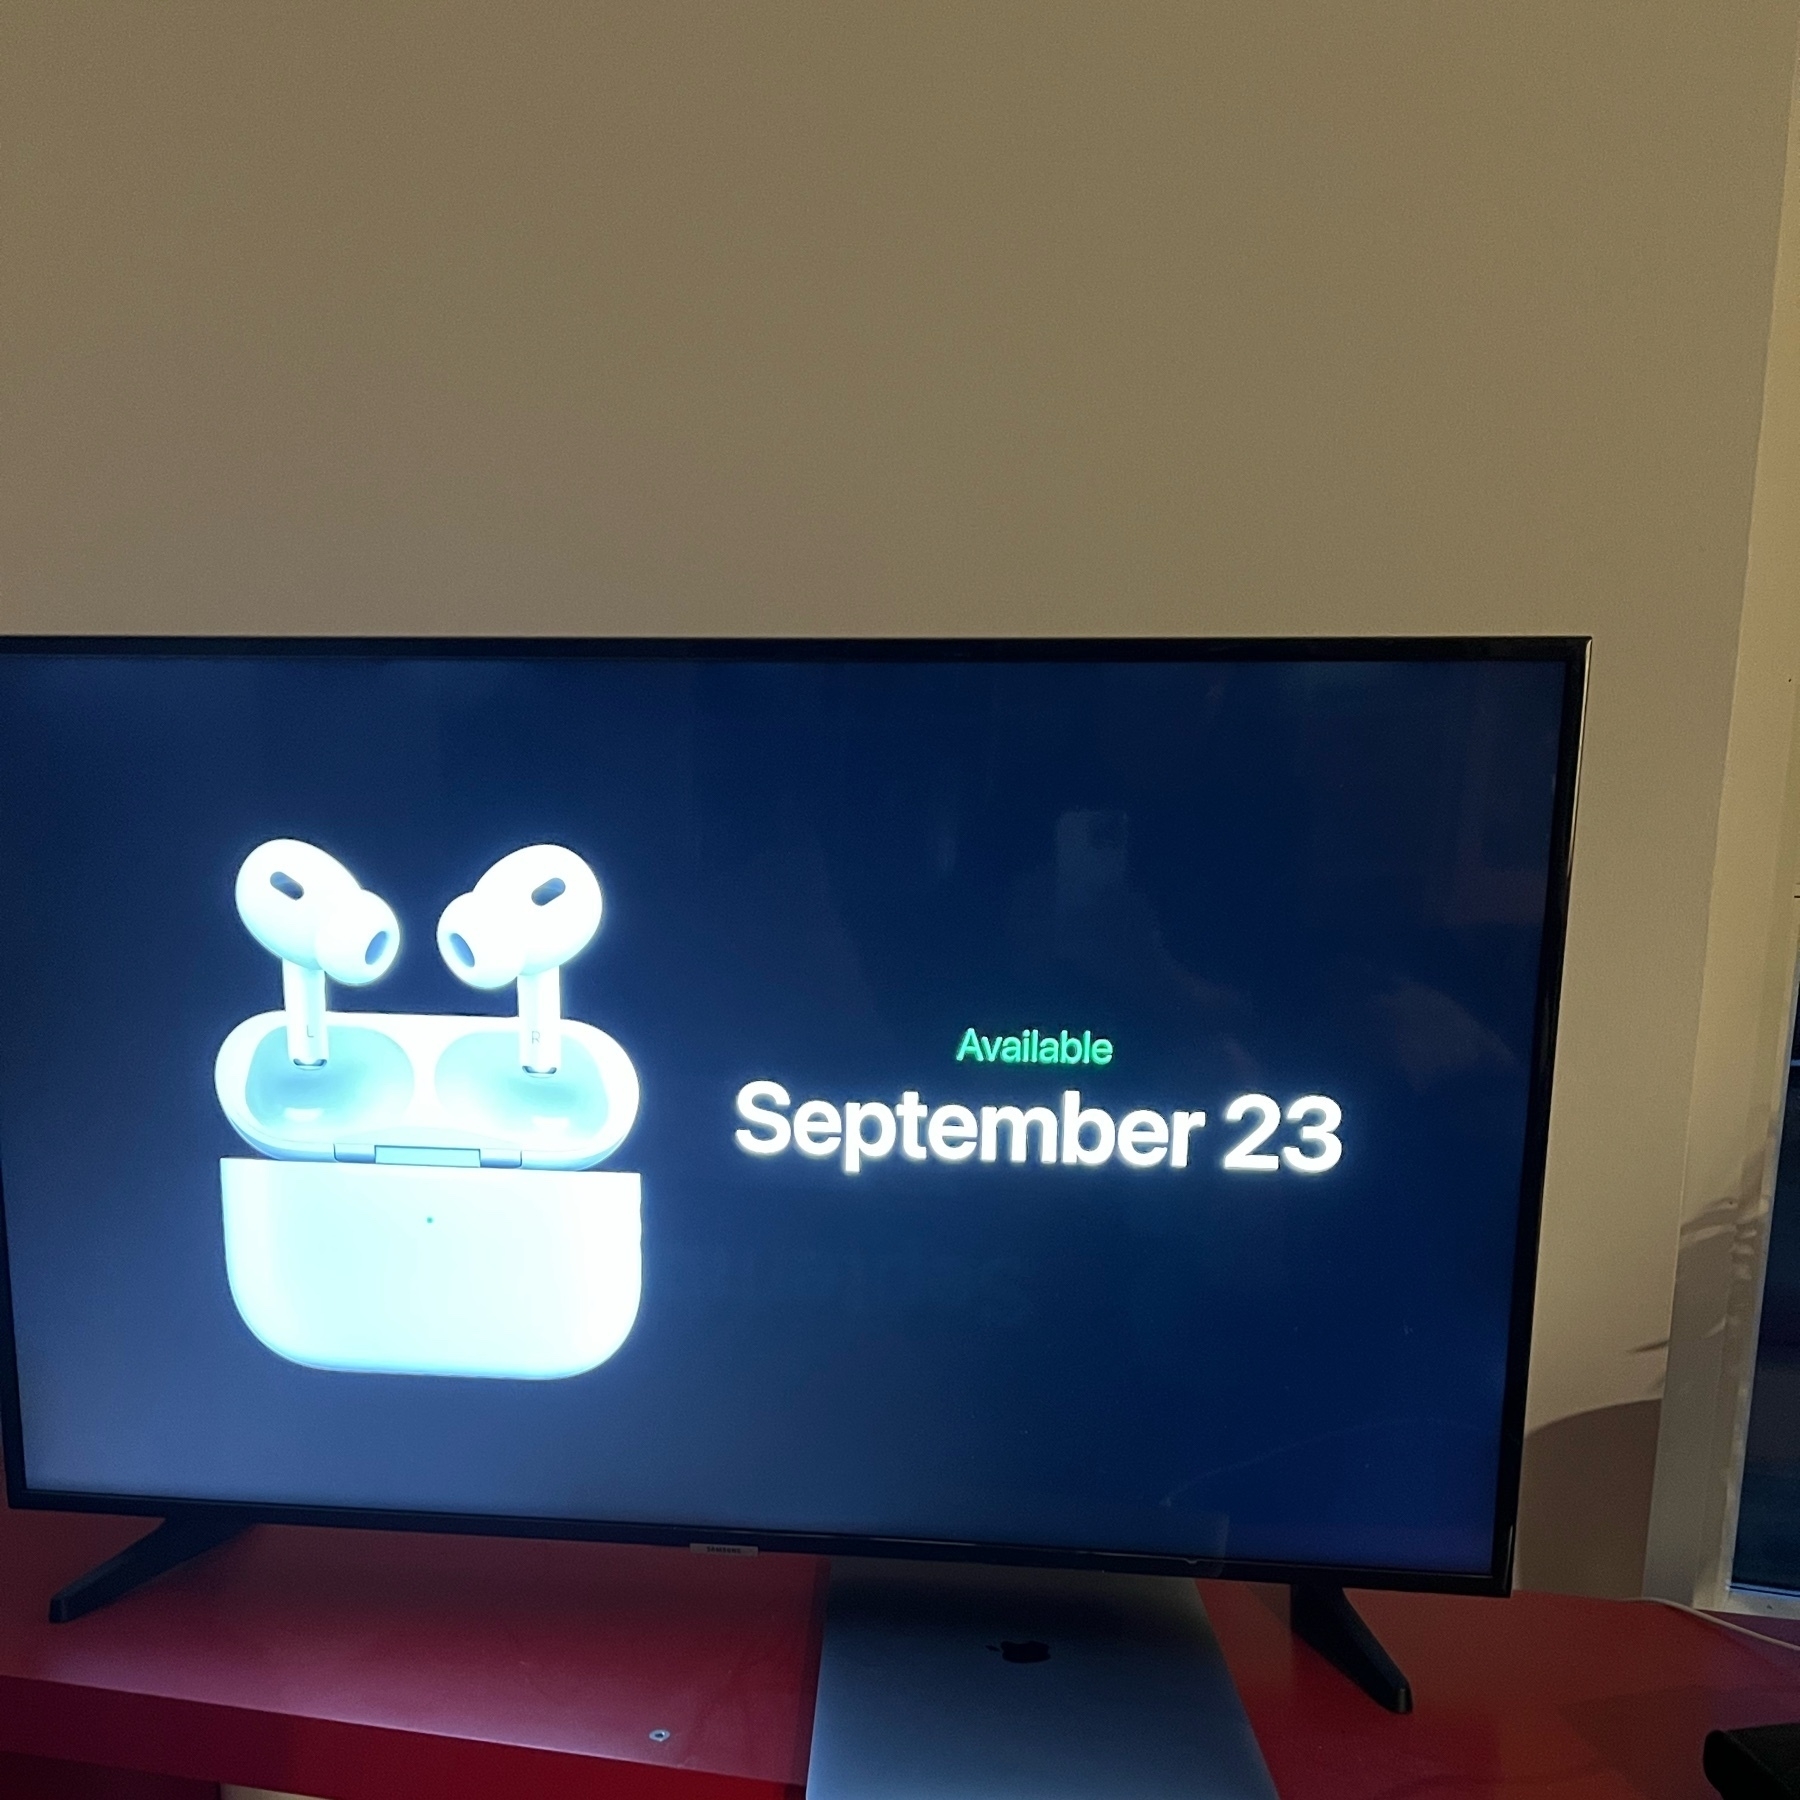 airpods pro and date September 23rd